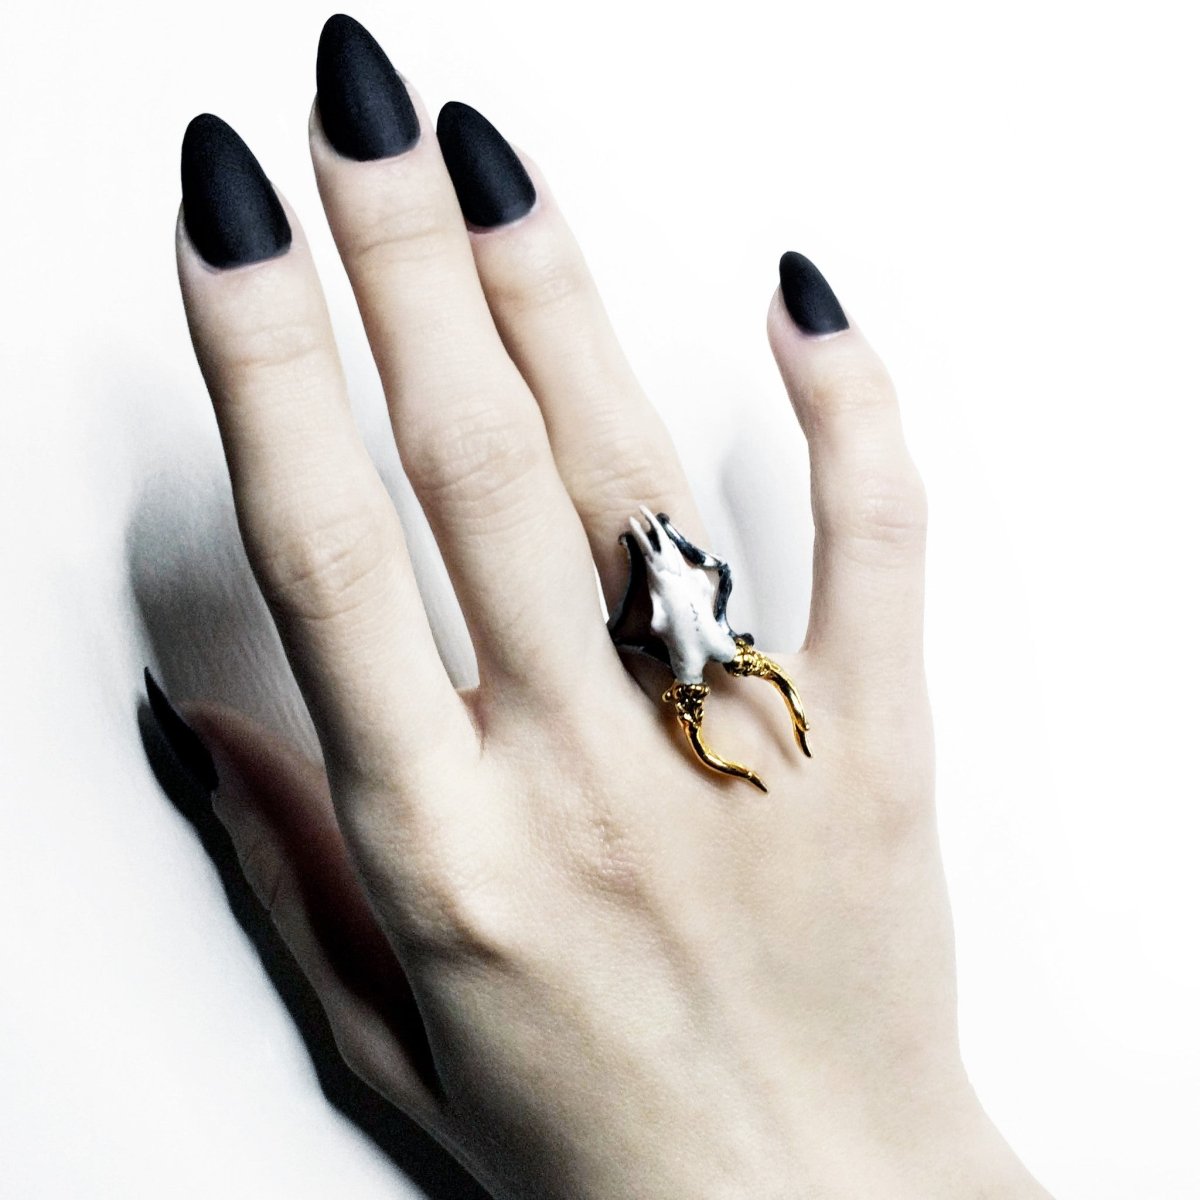 DOE RING - Macabre Gadgets Store